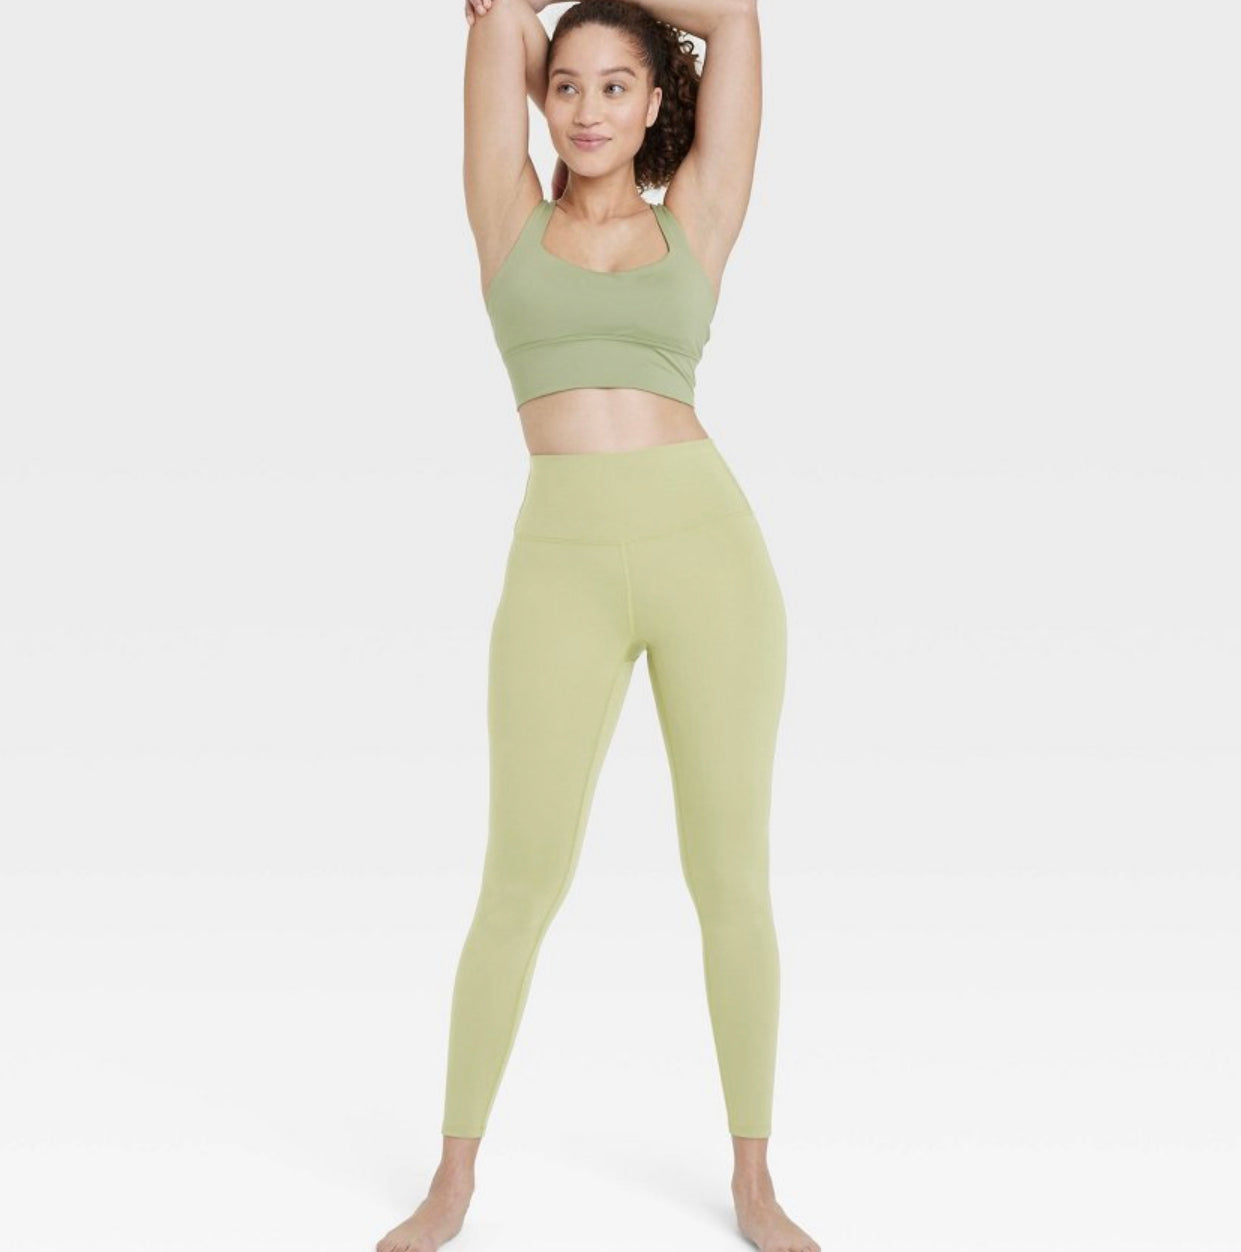 NEW Women's Brushed Sculpt High-Rise Leggings - All in Motion™ L